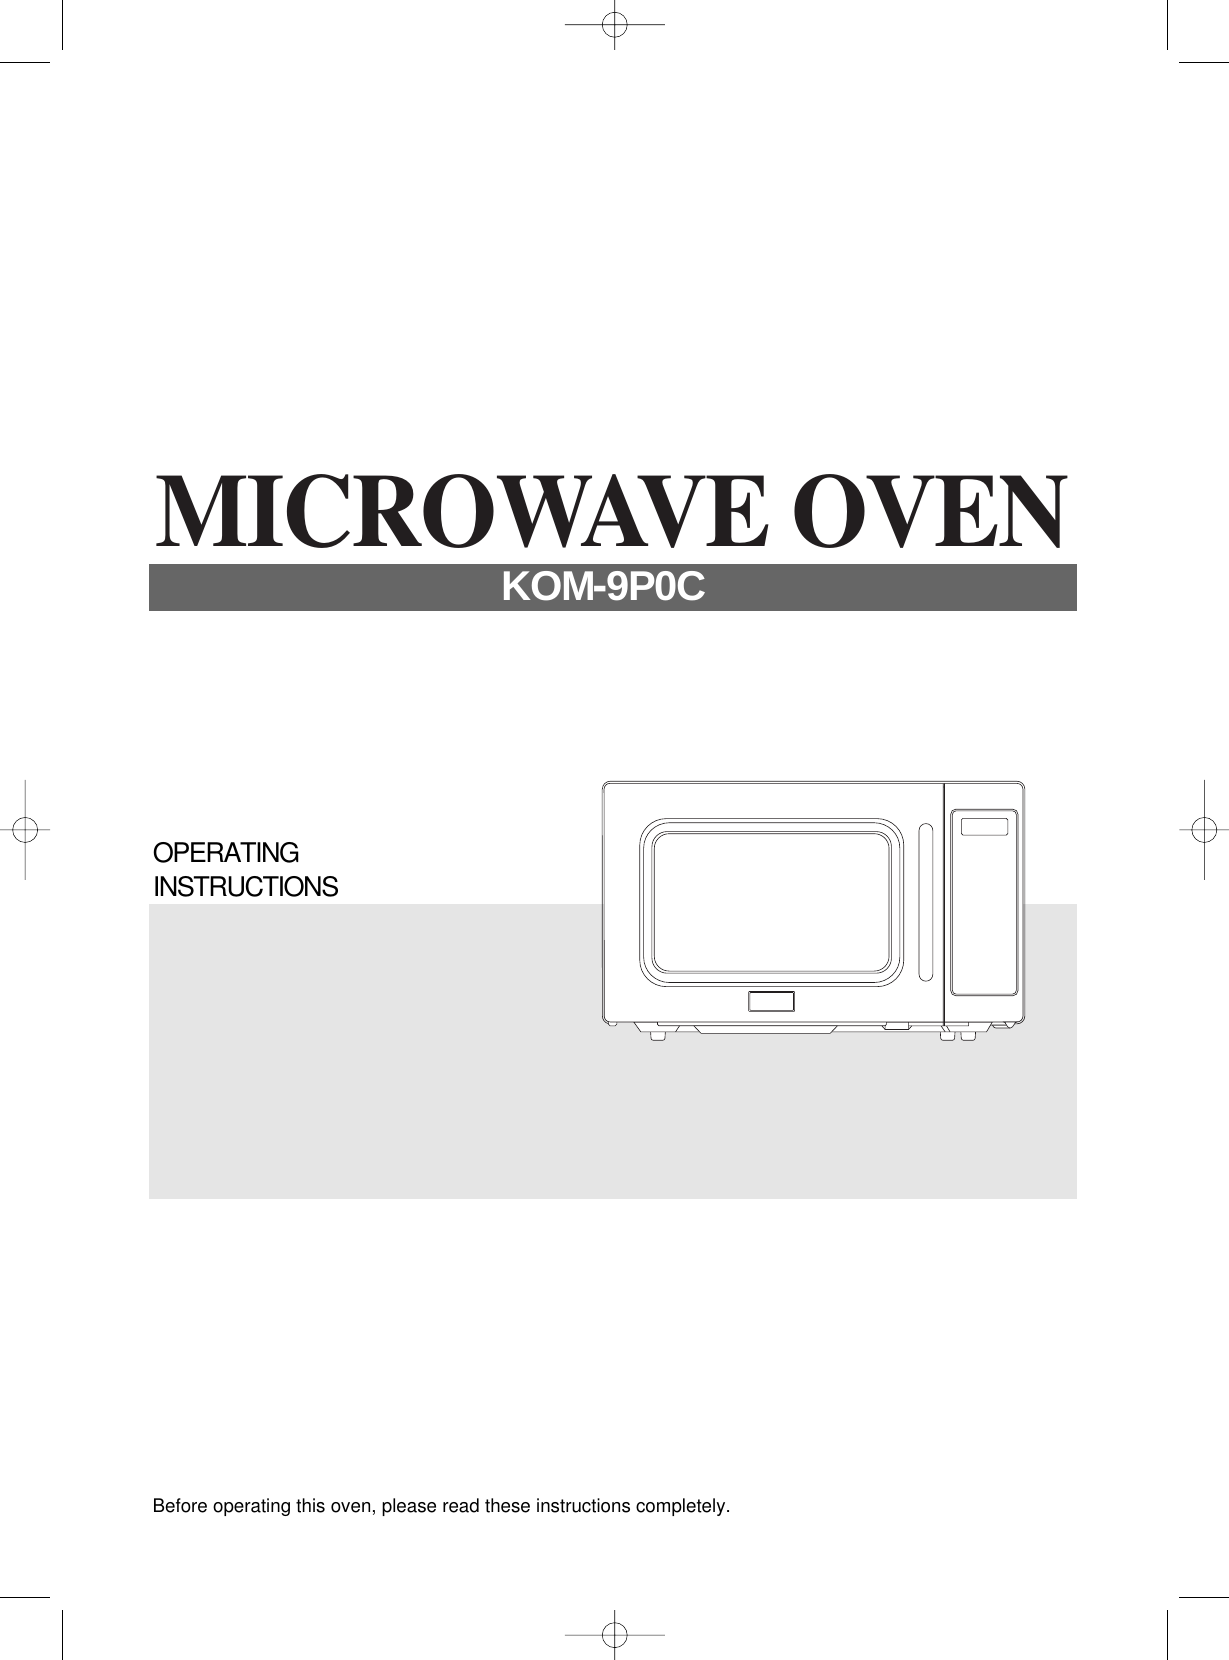 Before operating this oven, please read these instructions completely.OPERATINGINSTRUCTIONSMICROWAVE OVENKOM-9P0C